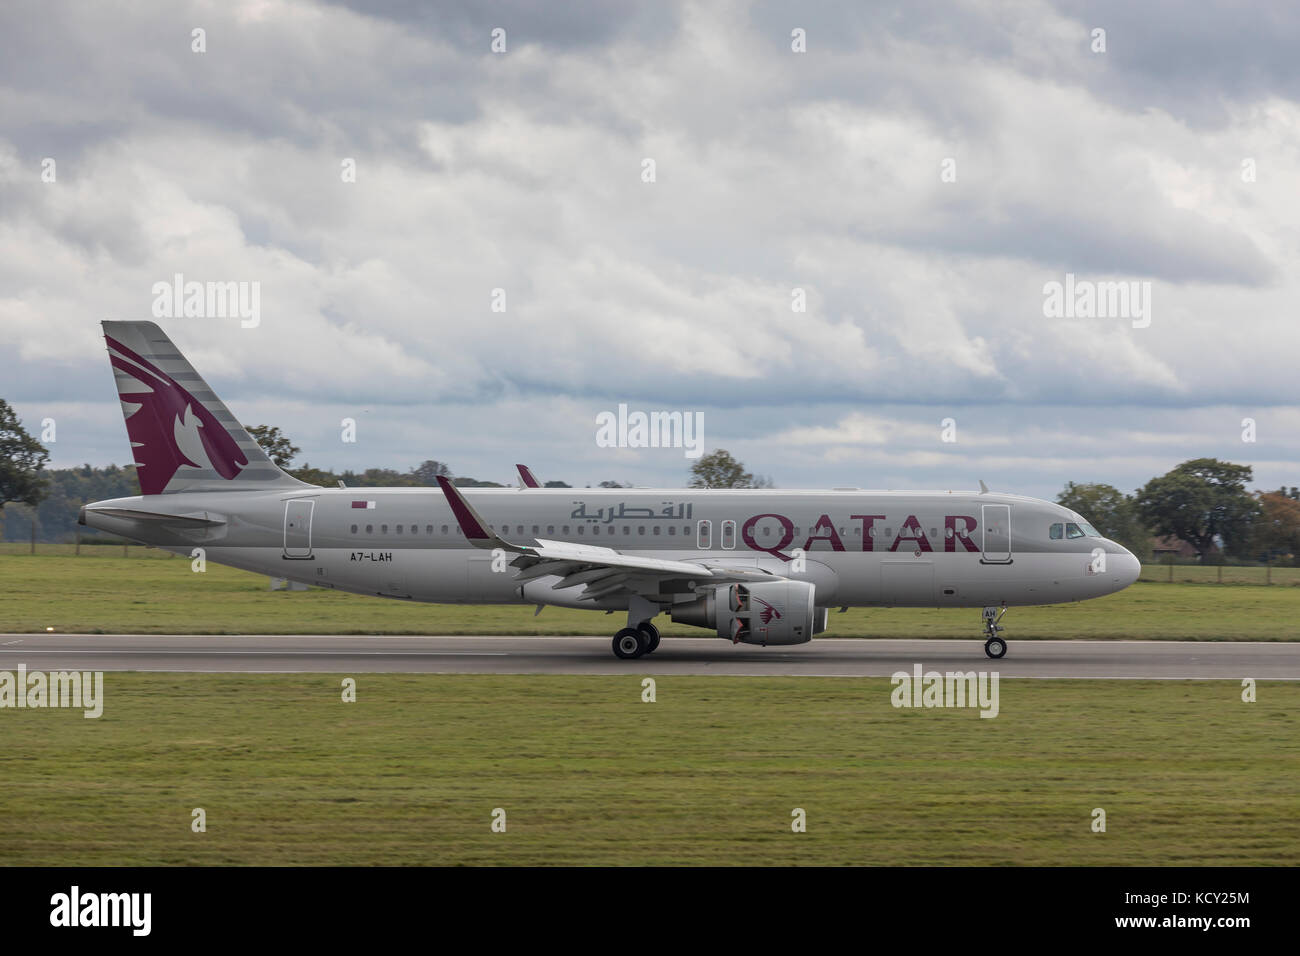 Luton, UK. 7th October, 2017. Qatar Airways Airbus A320 aircraft, A7-LAH, landing at London Luton Airport at 1pm on Saturday 7th October 2017 from Mahon as part of the Civil Aviation Authority's flying programme to bring back passengers following the administration of Monarch Airlines. Credit: Nick Whittle/Alamy Live News Stock Photo